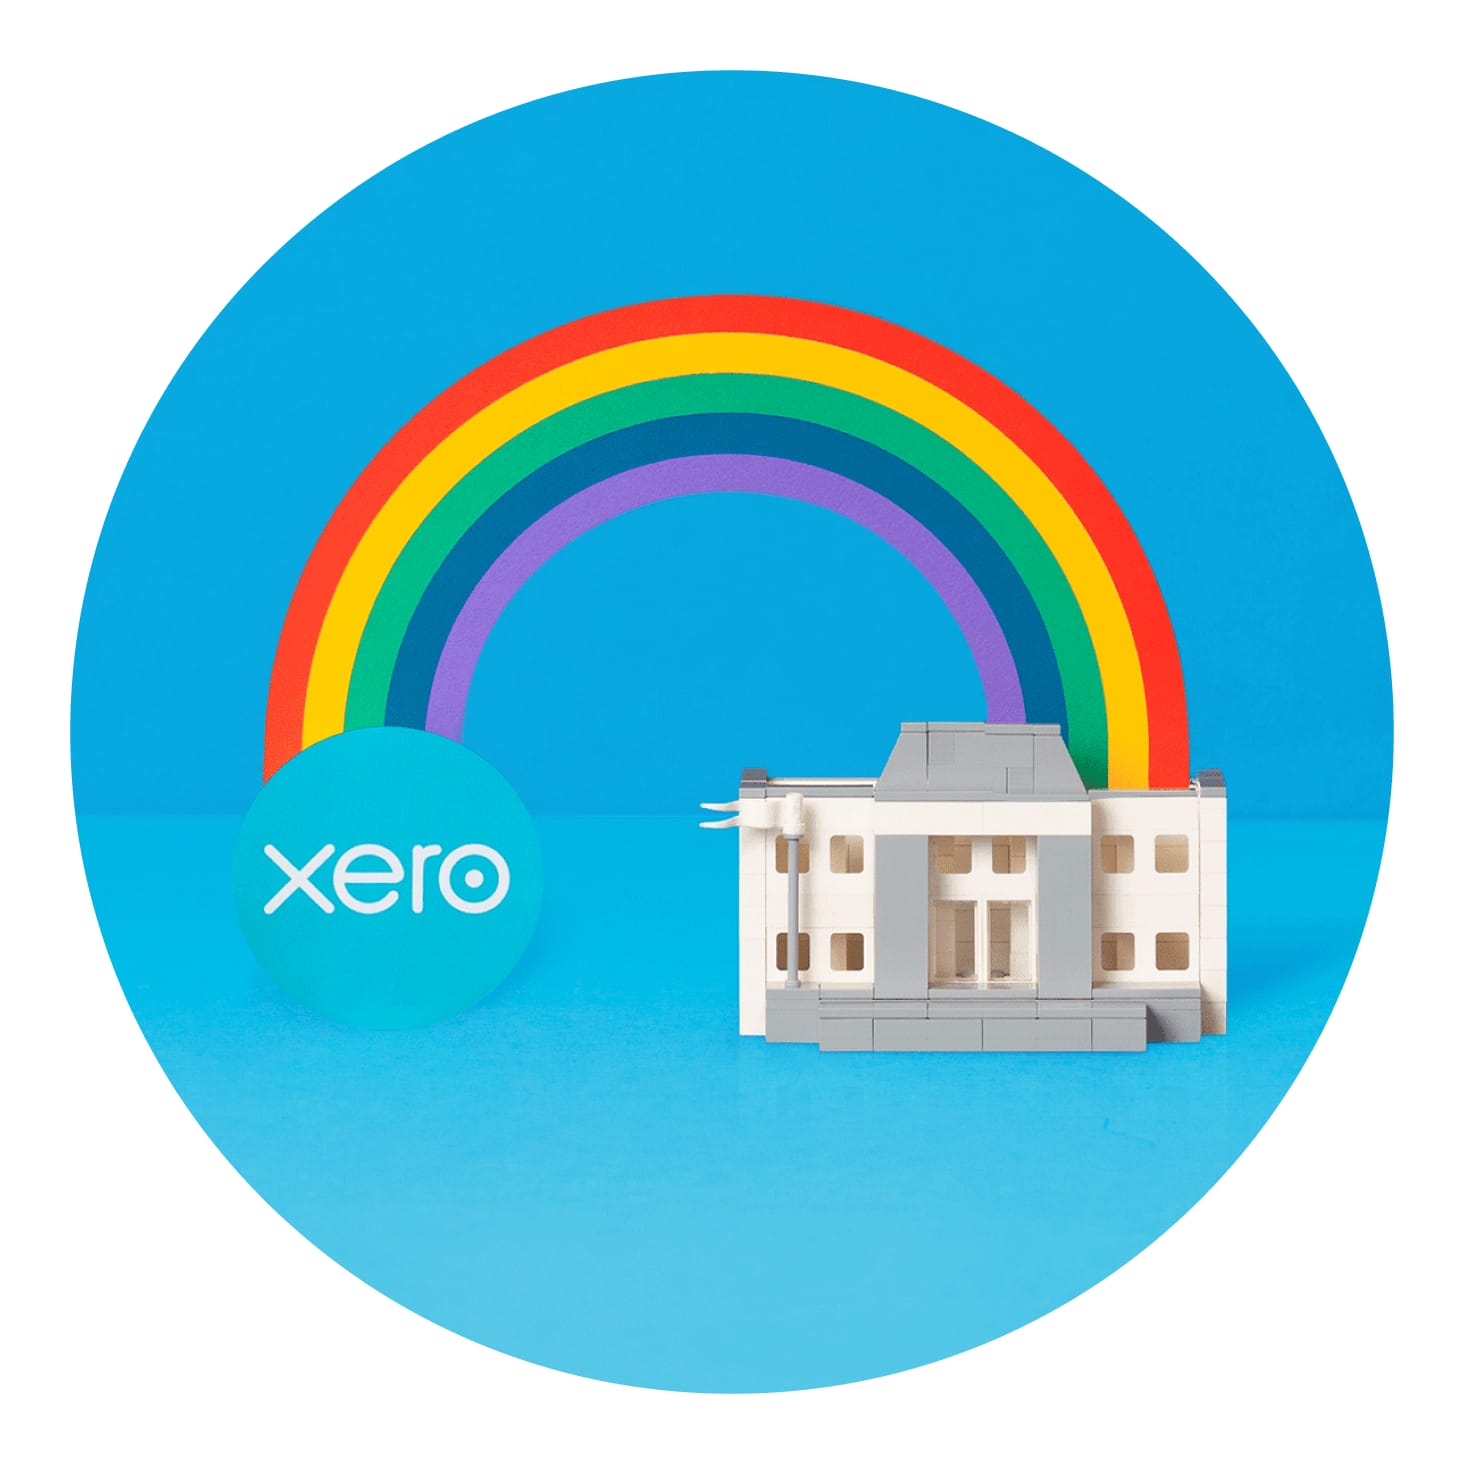 A rainbow arches between Xero and an Inland Revenue office building.